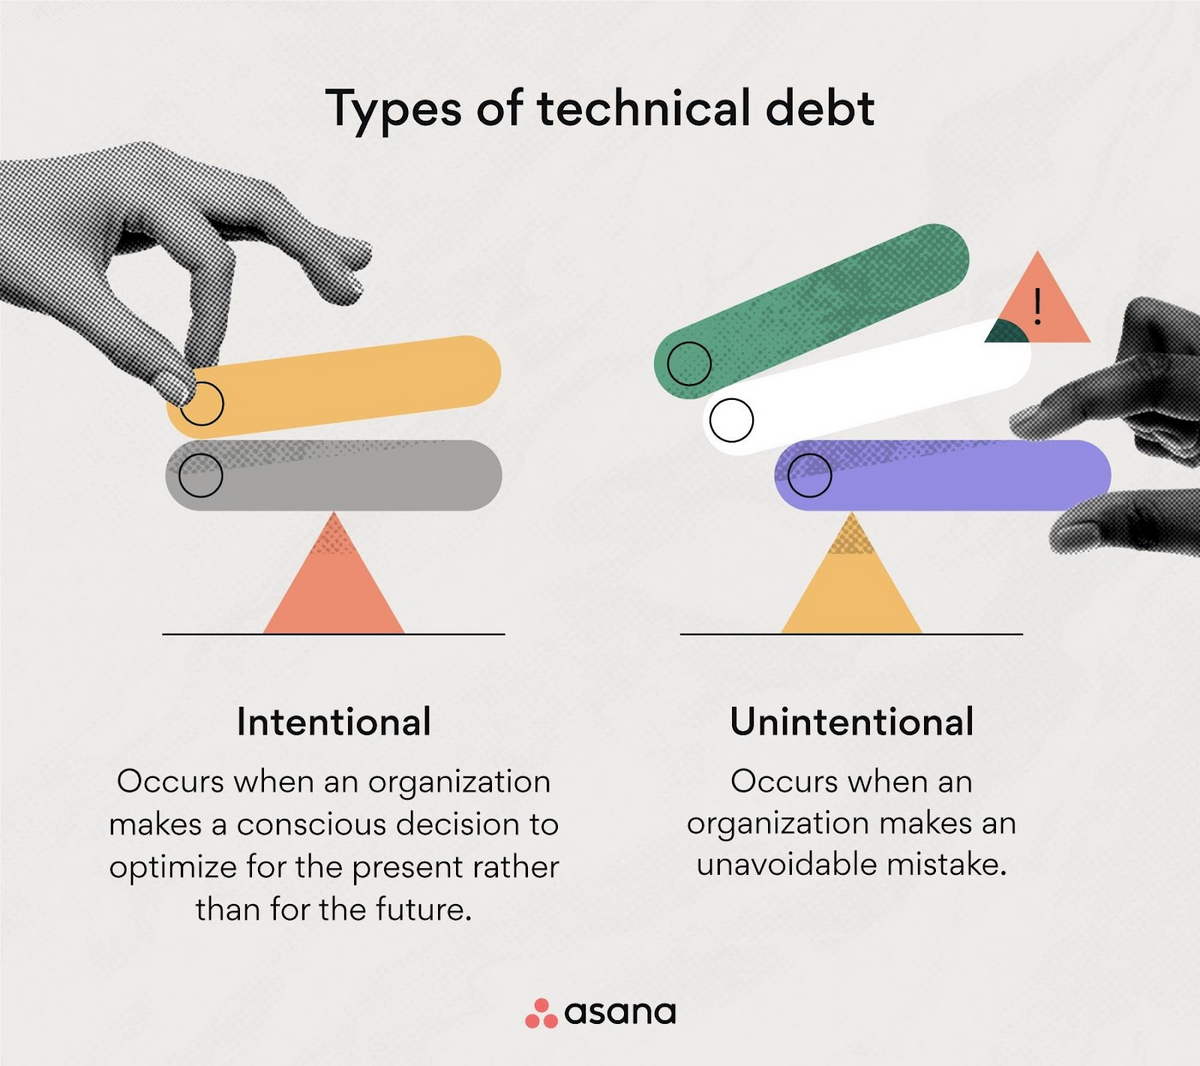 Types of technical debt